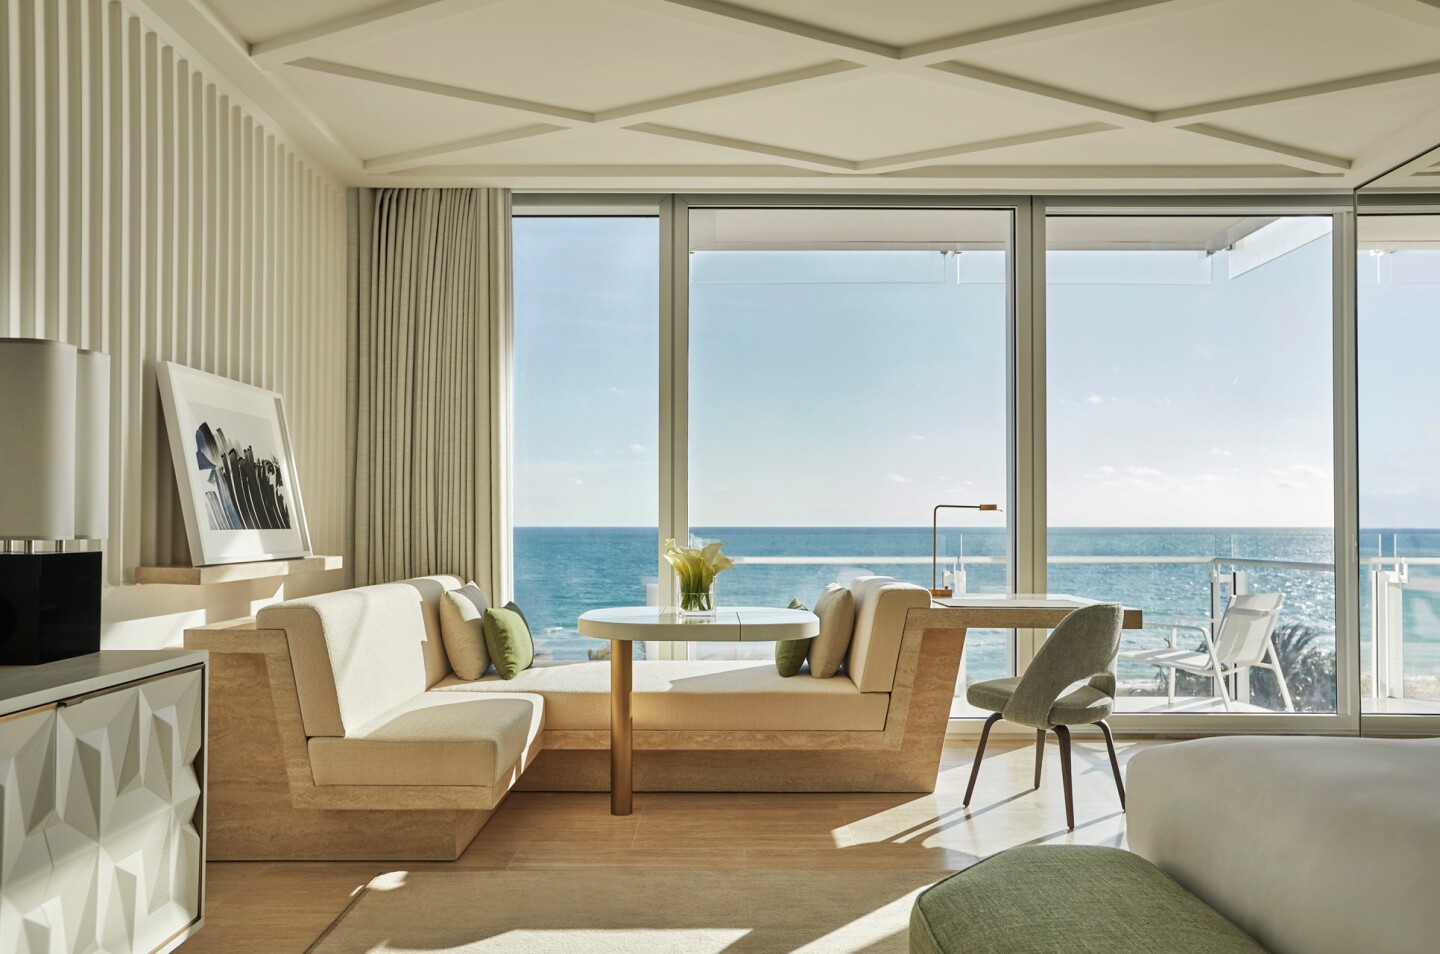 <h2>Day 2: Visit classic South Beach</h2> <p>Rise in time to catch a syrupy sunrise over the Atlantic Ocean from a suite at the <a class="Link" href="https://www.fourseasons.com/surfside/" rel="noopener">Four Seasons Hotel at the Surfclub, Surfside, Florida</a>, a family favorite thanks to the complimentary all-day kids club for ages 4 to 12.</p> <p>Hop on one of the complimentary bicycles (or a Miami-Dade Transit bus) for a leisurely ride south to South Beach. Set your sights on two classic restaurants for lunch, suggests Lee Brian Schrager, founder of the <a class="Link" href="https://sobewff.org/" rel="noopener">Food Network South Beach Wine & Food Festival</a> (Feb. 22–25, 2024). For “classic Miami,” he says <a class="Link" href="https://www.yelp.com/biz/puerto-sagua-restaurant-miami-beach" rel="noopener">Puerto Sagua</a> is a charming Cuban restaurant whose dishes shine. “I always get some croquetas or a <i>medianoche</i> sandwich to start the day, with a <i>cafecito</i>, of course.” During stone crab season (Oct. 15–May 1 every year), <a class="Link" href="https://joesstonecrab.com/" rel="noopener">Joe’s Stone Crab</a> is “one of those restaurants where you sit down and enjoy the entire experience,” Schrager says (the stone crab and hash browns are obligatory, and the stone crab bisque is a favorite for a quick lunch).</p> <p><a class="Link" href="https://www.miamiandbeaches.com/l/outdoor-experiences/south-pointe-park/2966" rel="noopener">South Pointe Park</a>, on South Beach’s southernmost tip, is a sweet spot for an afternoon swim in the ocean. A short stroll away, in the South of Fifth neighborhood, try the Latin American and Mediterranean fusion at <a class="Link" href="https://abbaletlv.com/" rel="noopener">Abbalé Telavivian Kitchen</a>; think Moroccan-spiced black grouper, <i>shakshuka</i>, and shawarma-spiced wagyu picanha steak.</p> <p>The Four Seasons’ concierge, Brian Bean, also suggests an outing to <a class="Link" href="https://palominoranchtours.com/" rel="noopener">Palomino Ranch</a> 20 miles south in Key Biscayne for an unexpected eco-tour—it plays out on horseback, just minutes from downtown’s high-rises, and wraps in history and nature during a visit to the gorgeous coastal hammock trails maintained by volunteers at Virginia Key Beach Park. “You start the tour through beautiful scenery and then finish trotting on these gentle horses through warm waters. It’s not crowded and is really quite fun, peaceful, and memorable,” says Bean.</p>